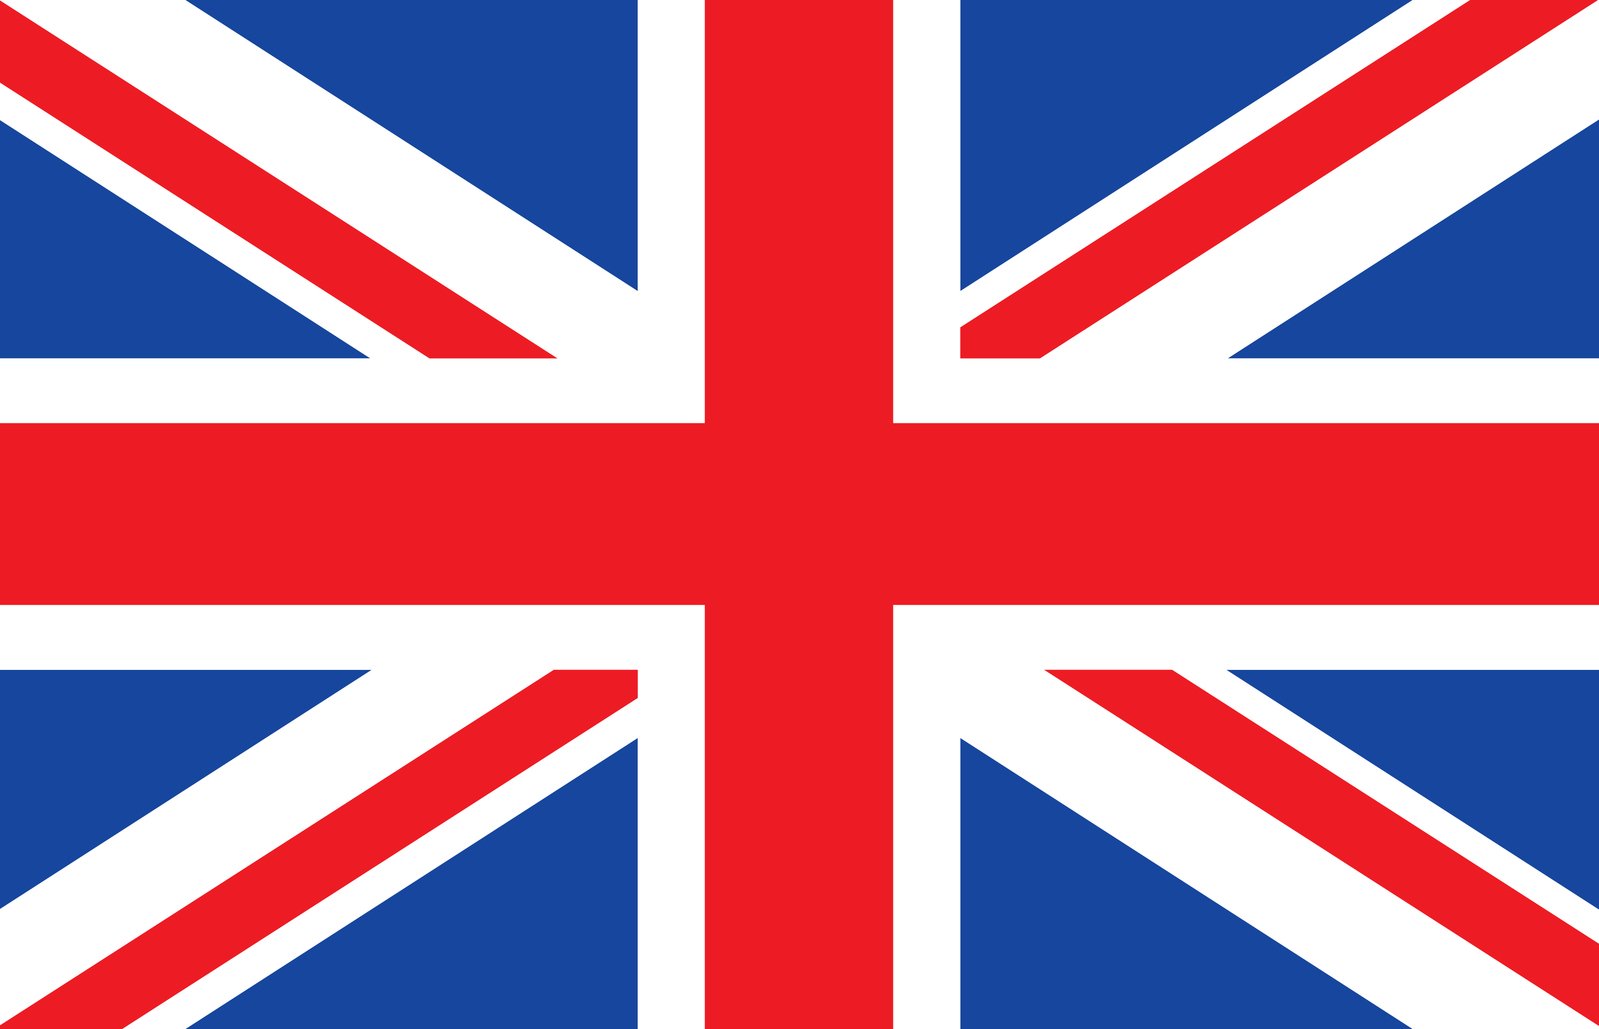 The flag of the U.K.